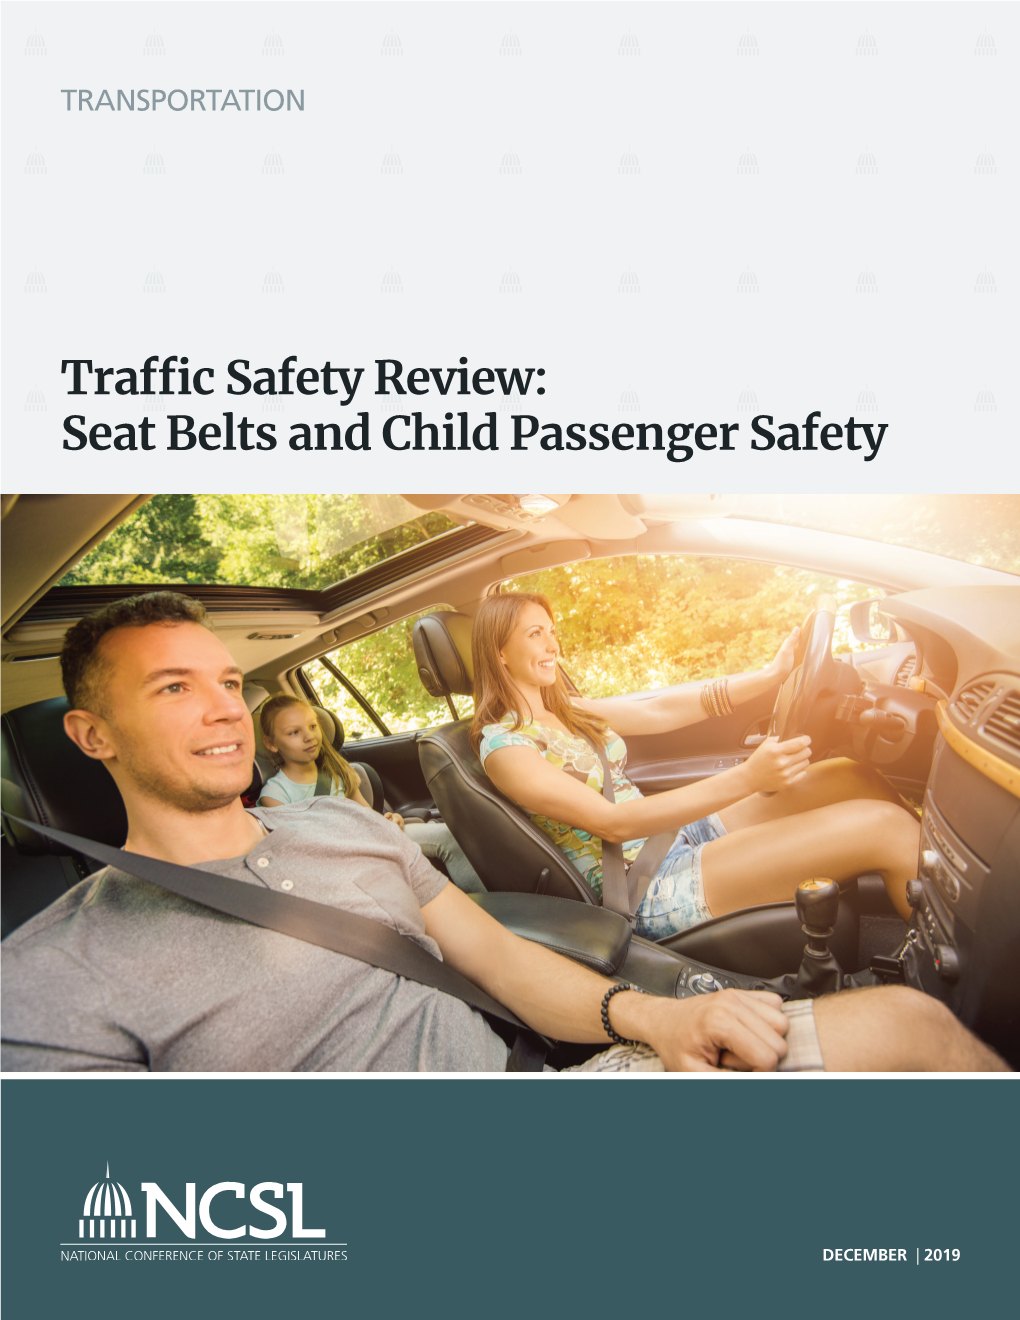 Seat Belts and Child Passenger Safety